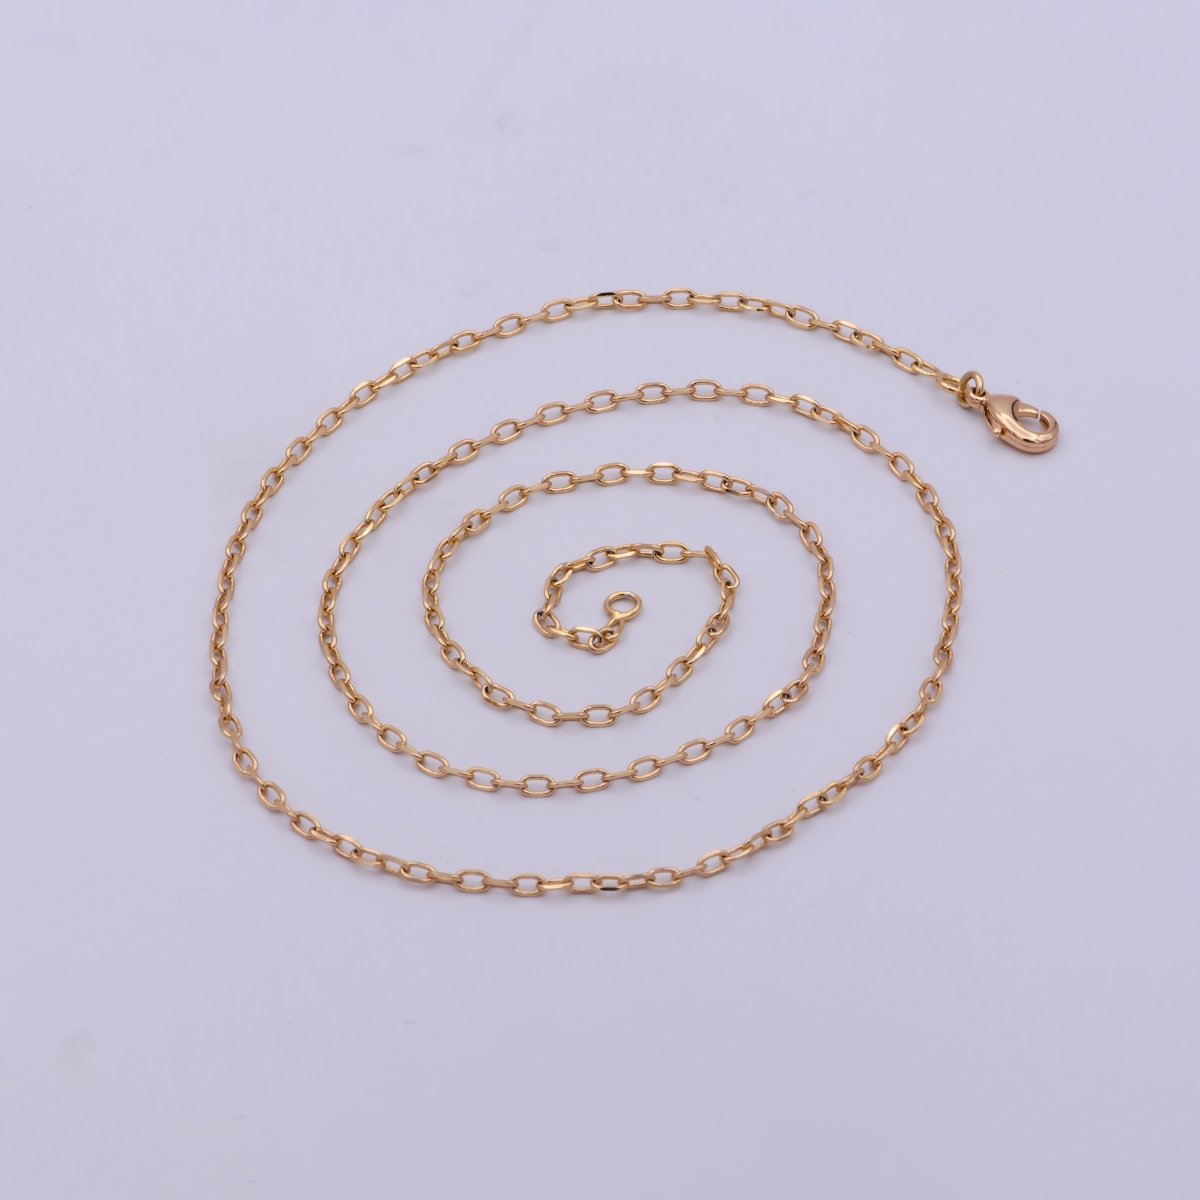 18K Gold Filled Cable Chain Necklace, 21.4 Inch Cable Chain Necklace, Dainty 1.7mm Link Necklace | WA-478 Clearance Pricing - DLUXCA